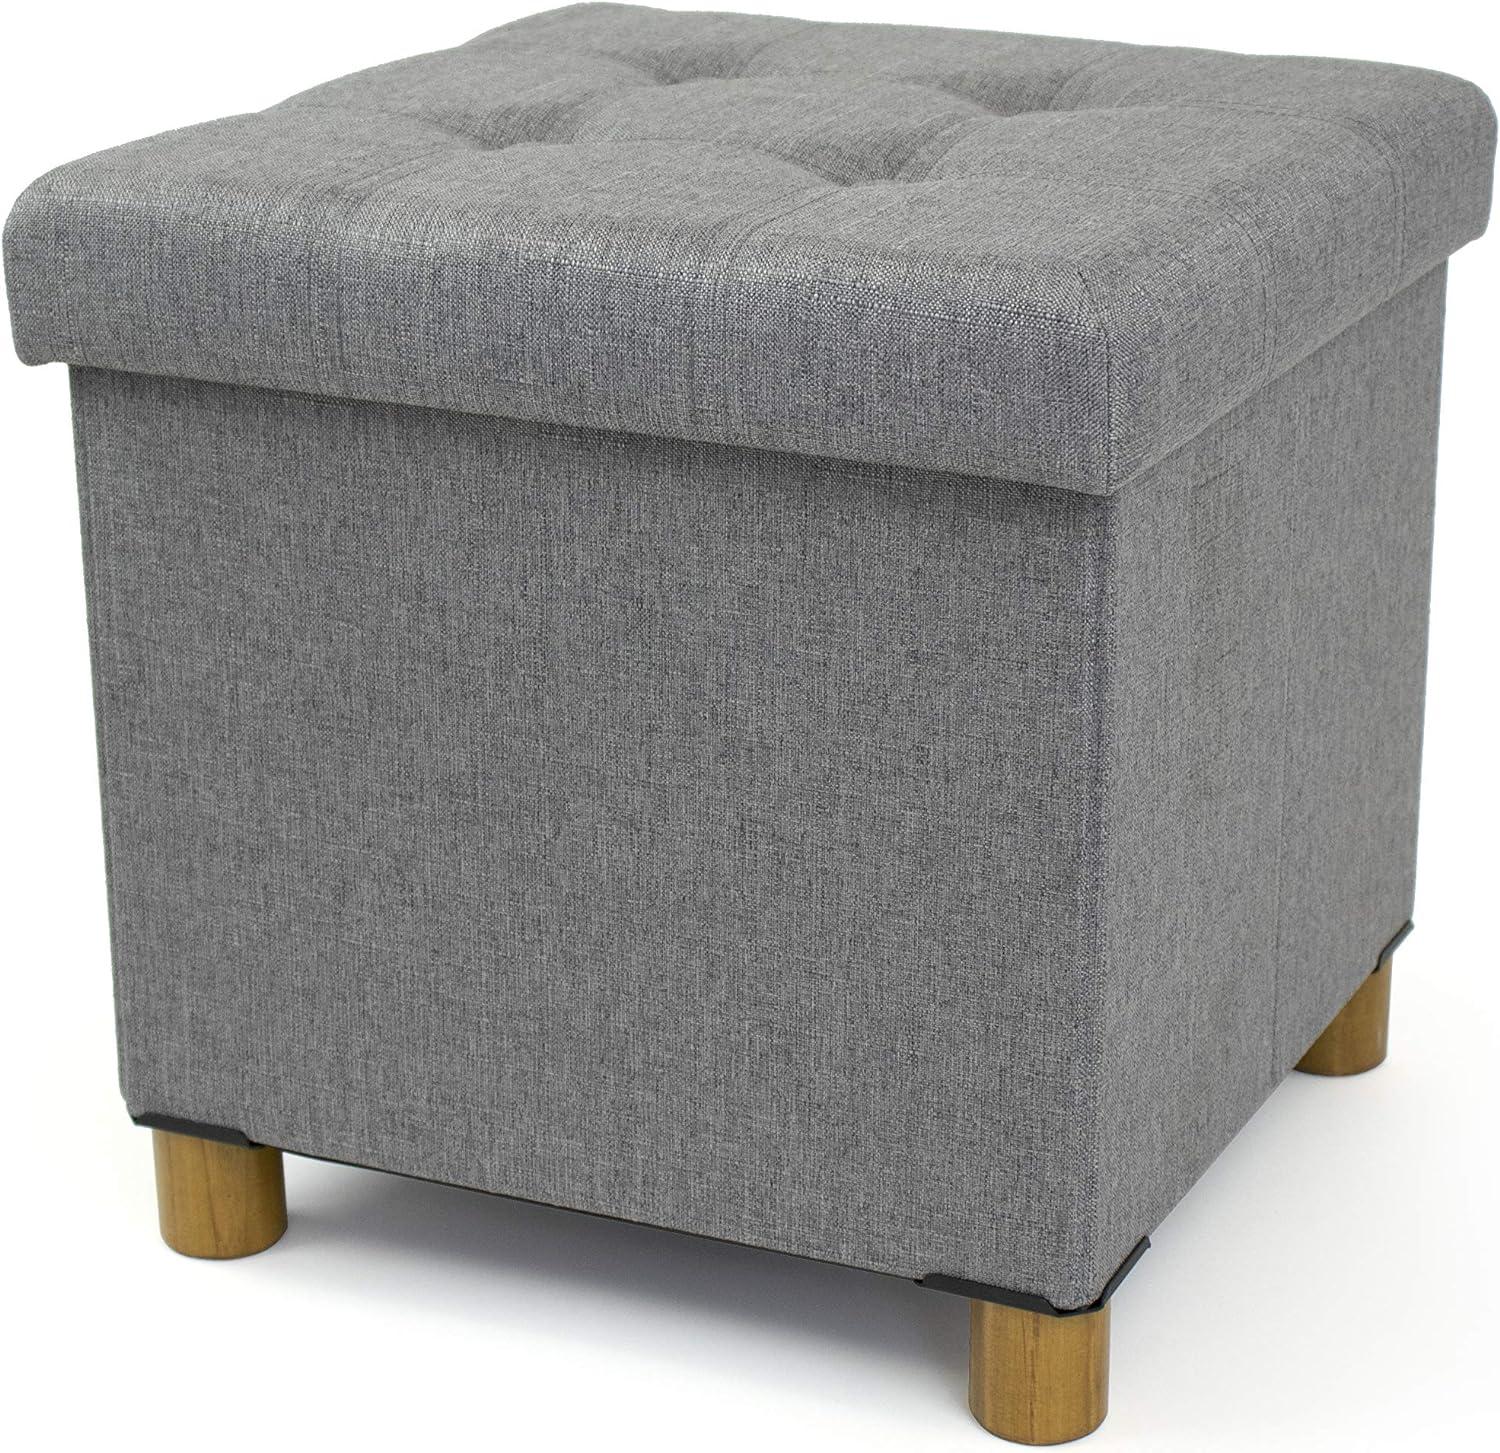 Elegant Grey Collapsible Cube Storage Ottoman with Tray and Tufted Cushion